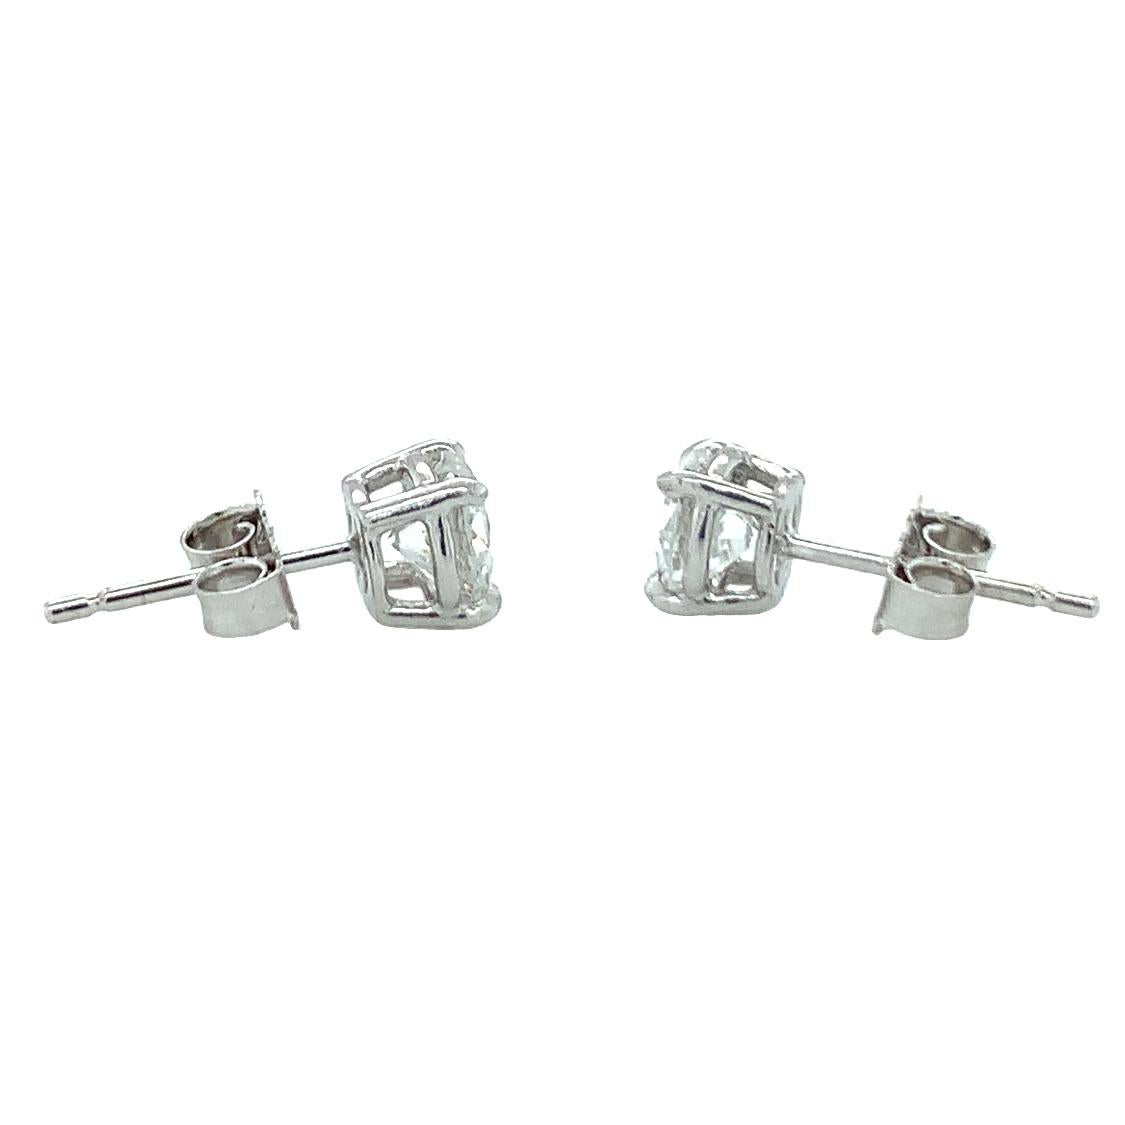 One pair of 14K white gold diamond stud earrings featuring two prong set, round brilliant cut diamonds totaling 0.89 ct. (0.46 ct, F / VS-2 + 0.43 ct., E / VS-1 with GIA e-reports). Feature push back backings and weighing 2 grams.

Brilliance,